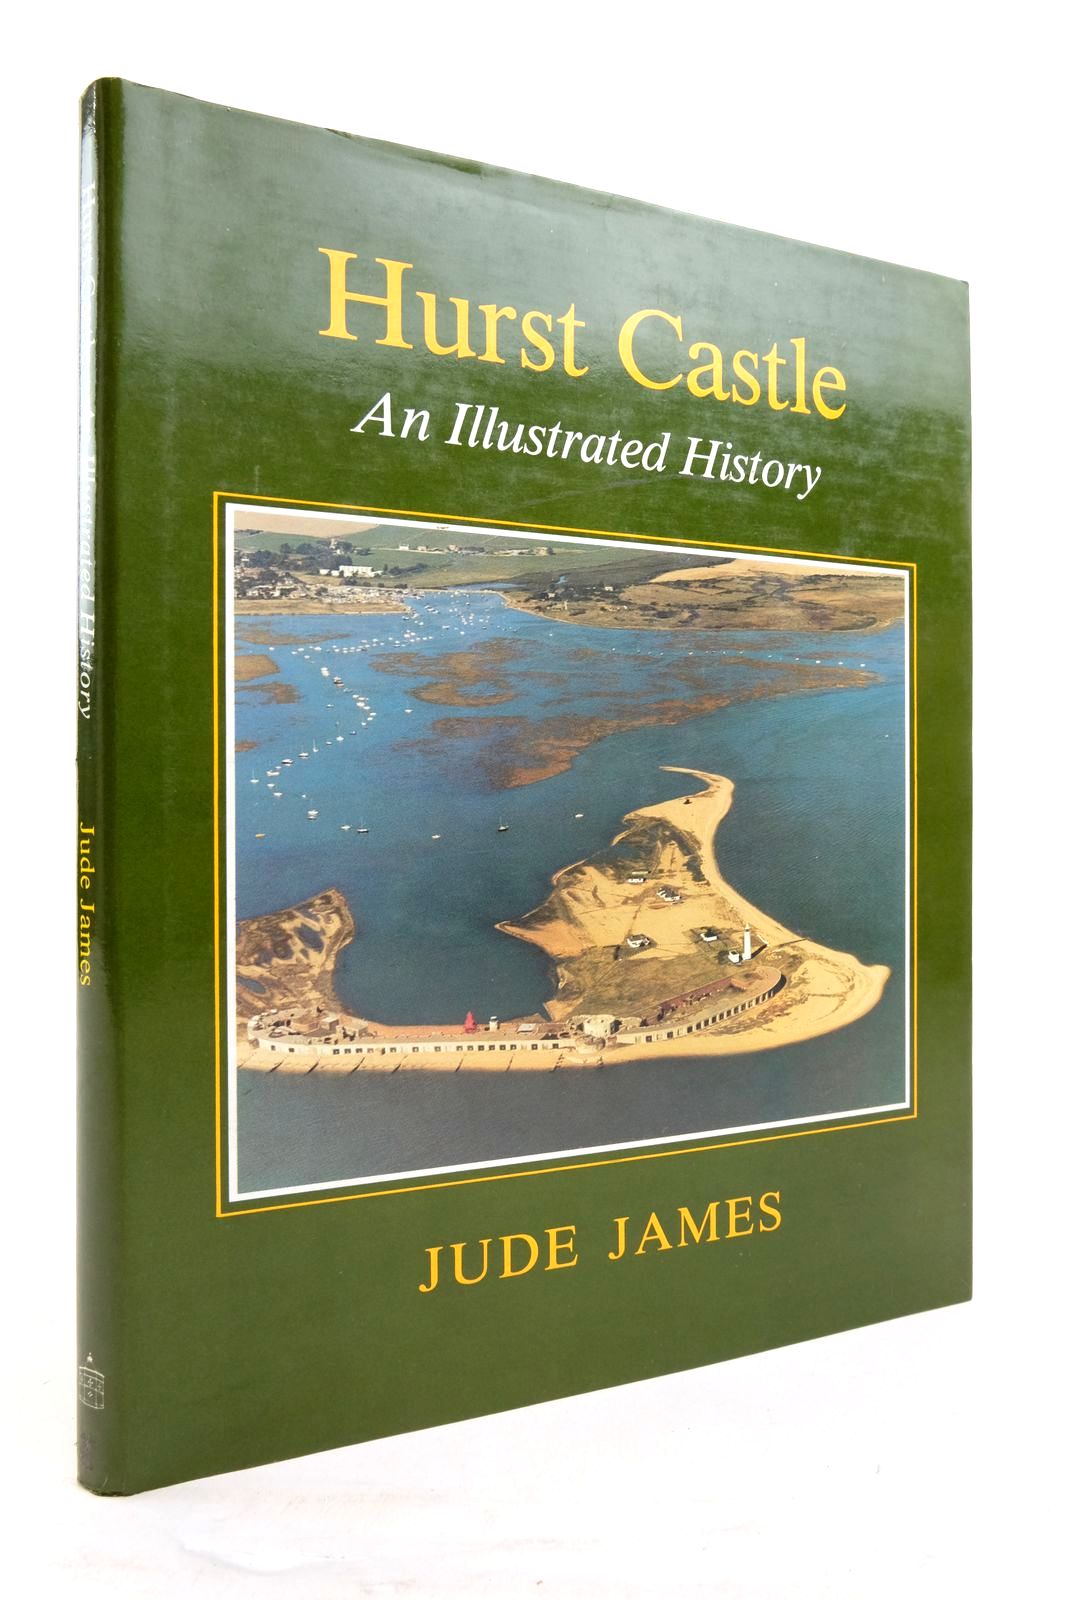 Photo of HURST CASTLE: AN ILLUSTRATED HISTORY written by James, Jude published by Dovecote Press (STOCK CODE: 2137693)  for sale by Stella & Rose's Books